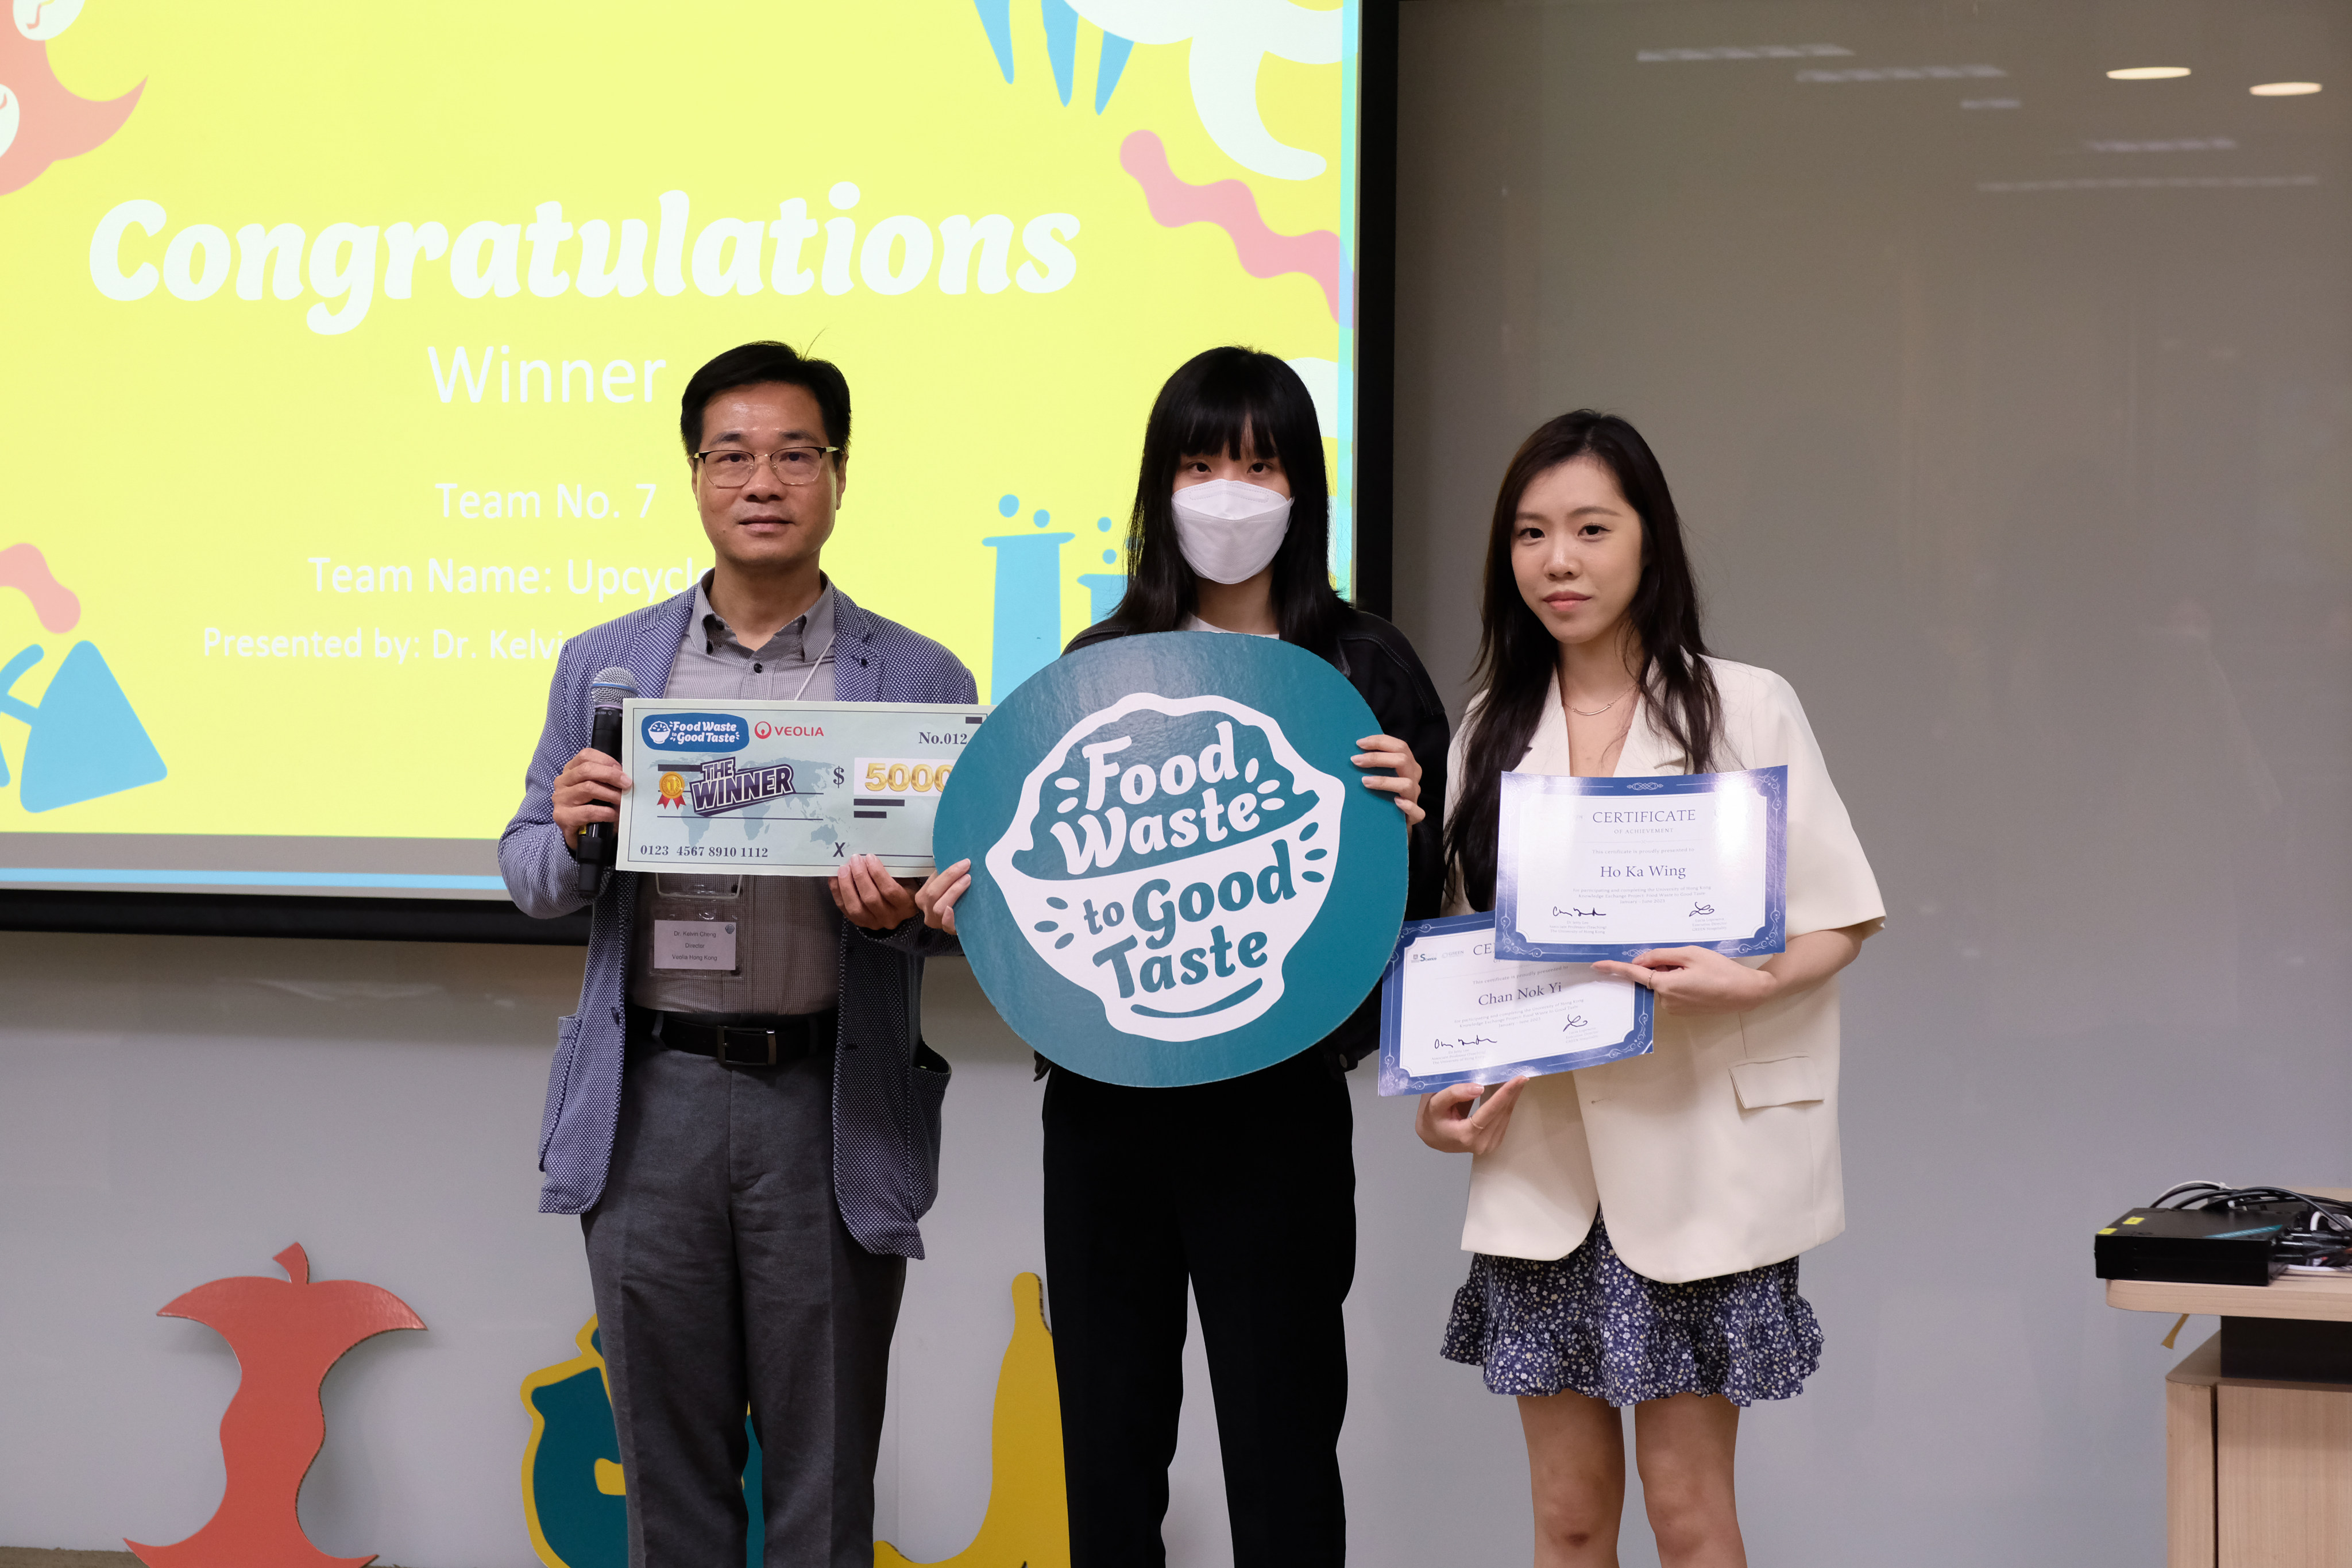 Dr. Kelvin Cheng, Director of Veolia Hong Kong, presents the first-place award to the winners of the innovation competition, Anson Chan Nok-yi and Gloria Ho Ka-wing. Photo: Erika Makino/Colin Wu